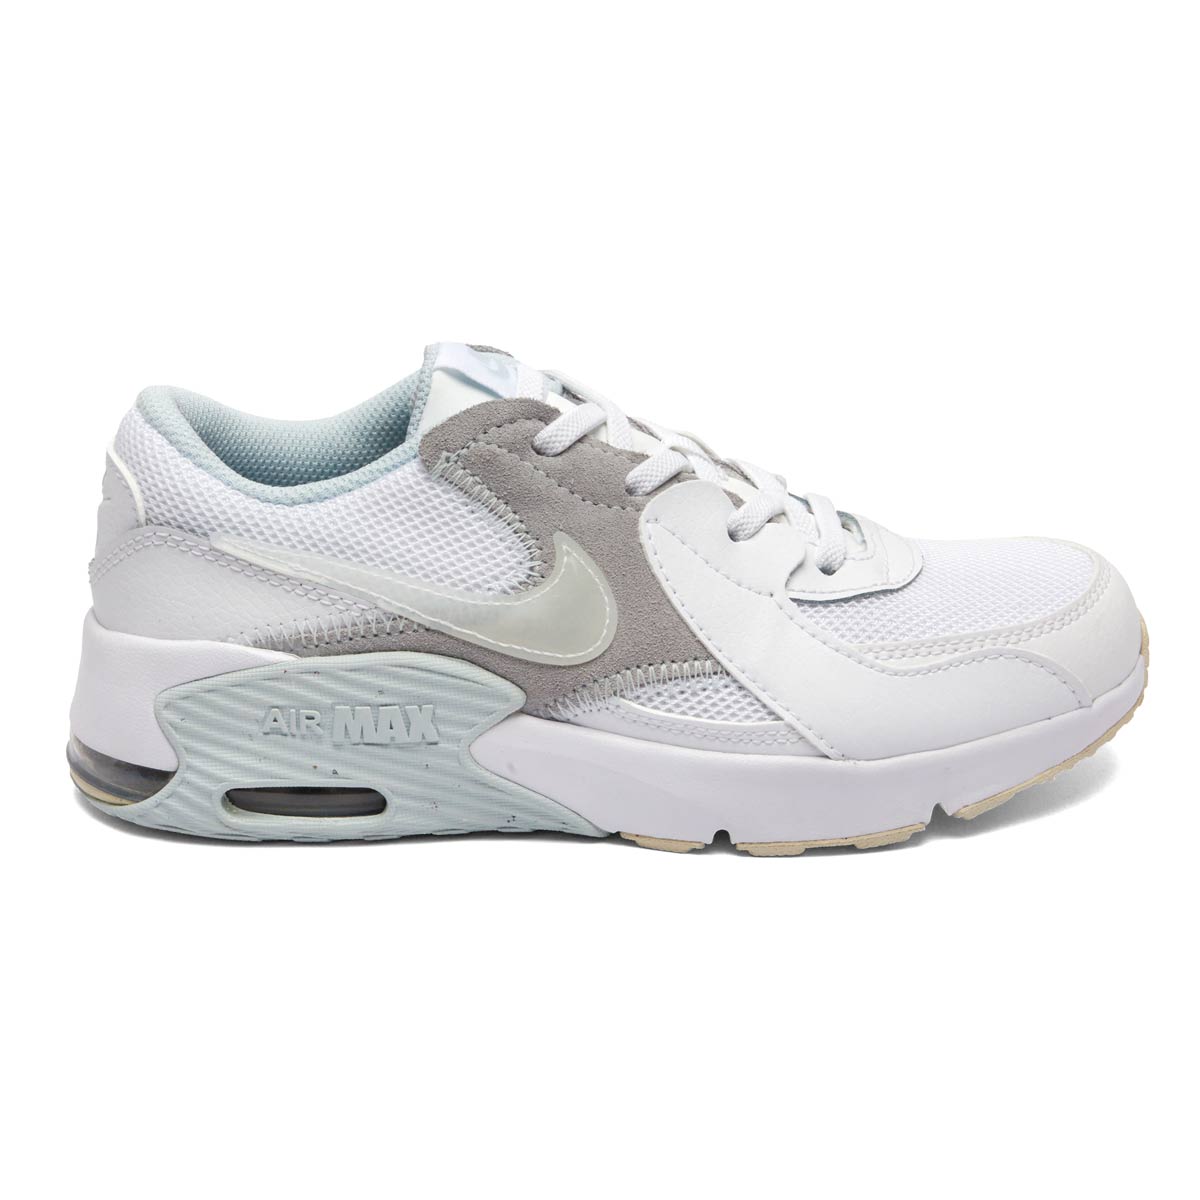 Max Sneaker PS – Nike Excee Air Youth PROOZY